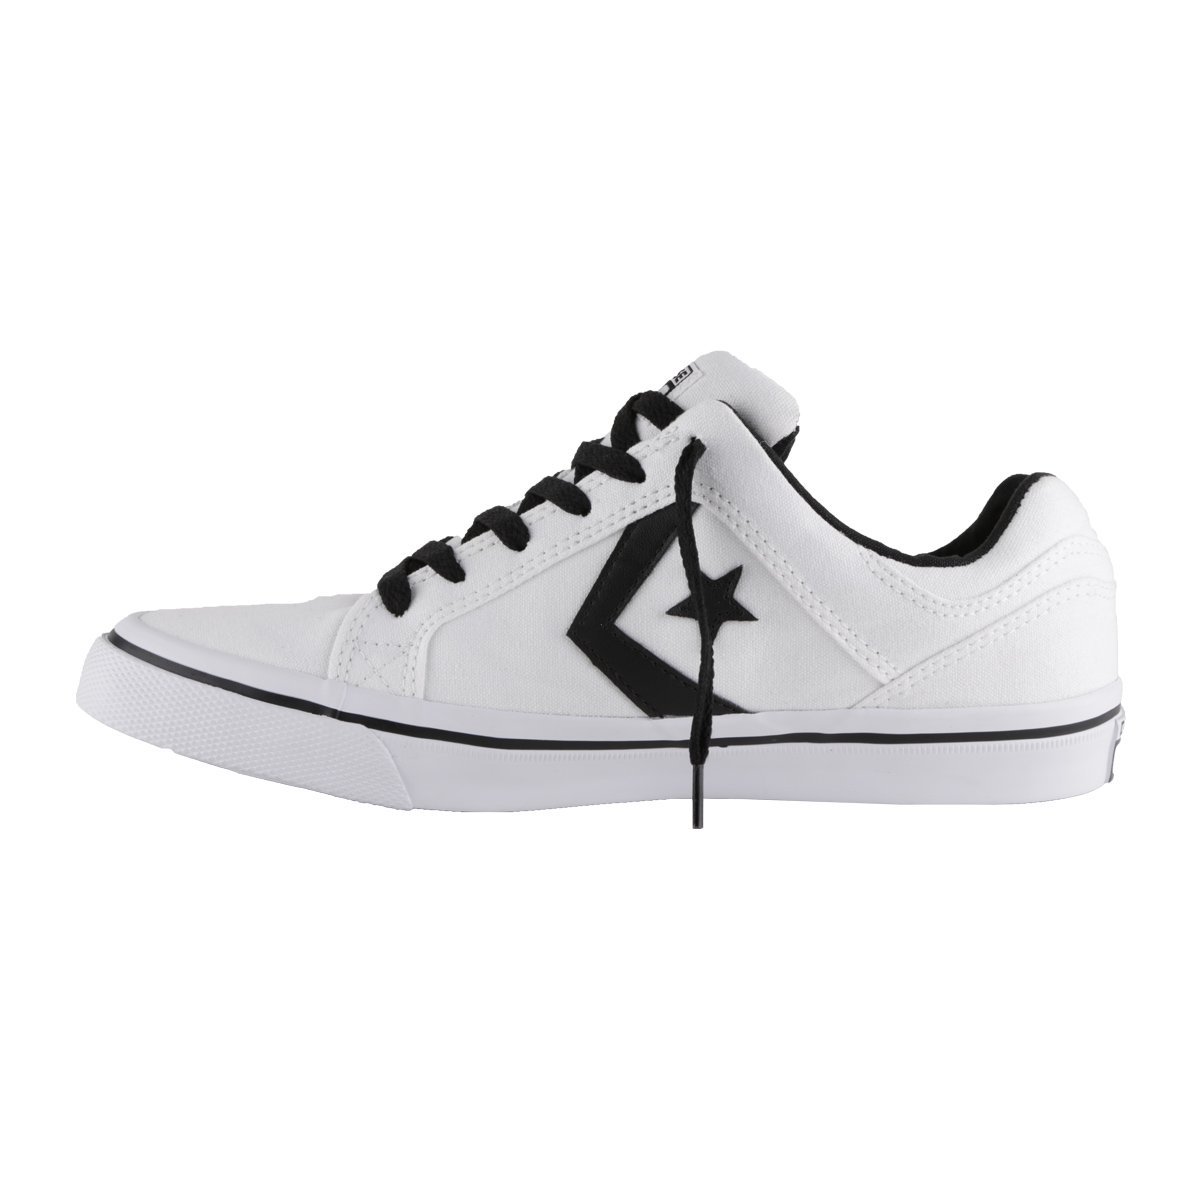 Tenis Choclo Casual Caballero Converse Star Player